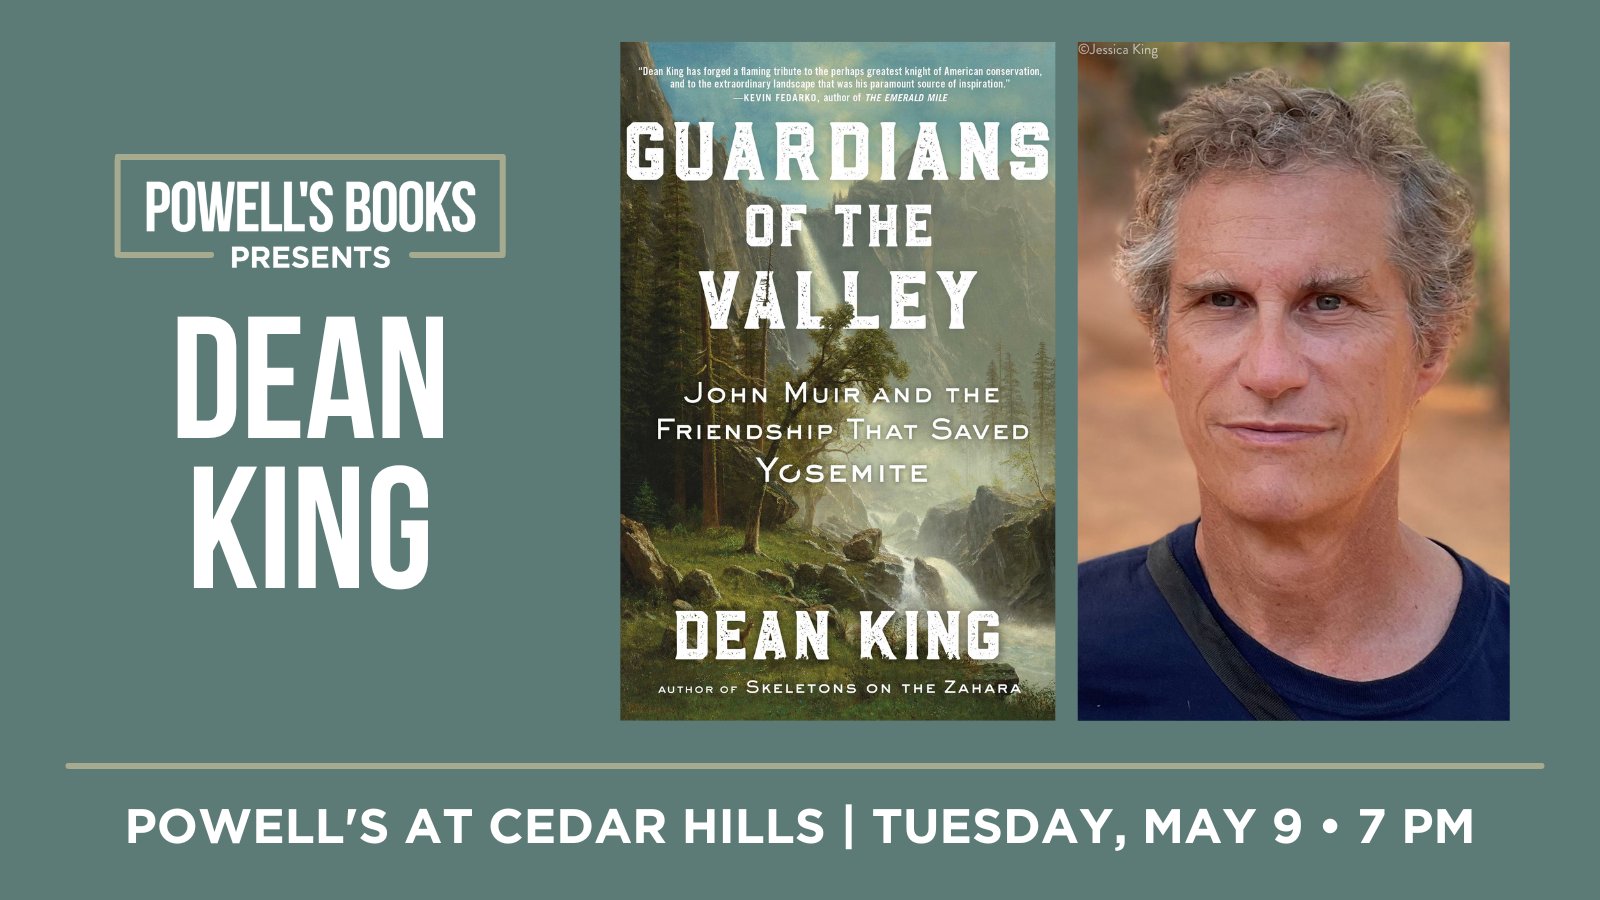 Guardians of the Valley, Book by Dean King